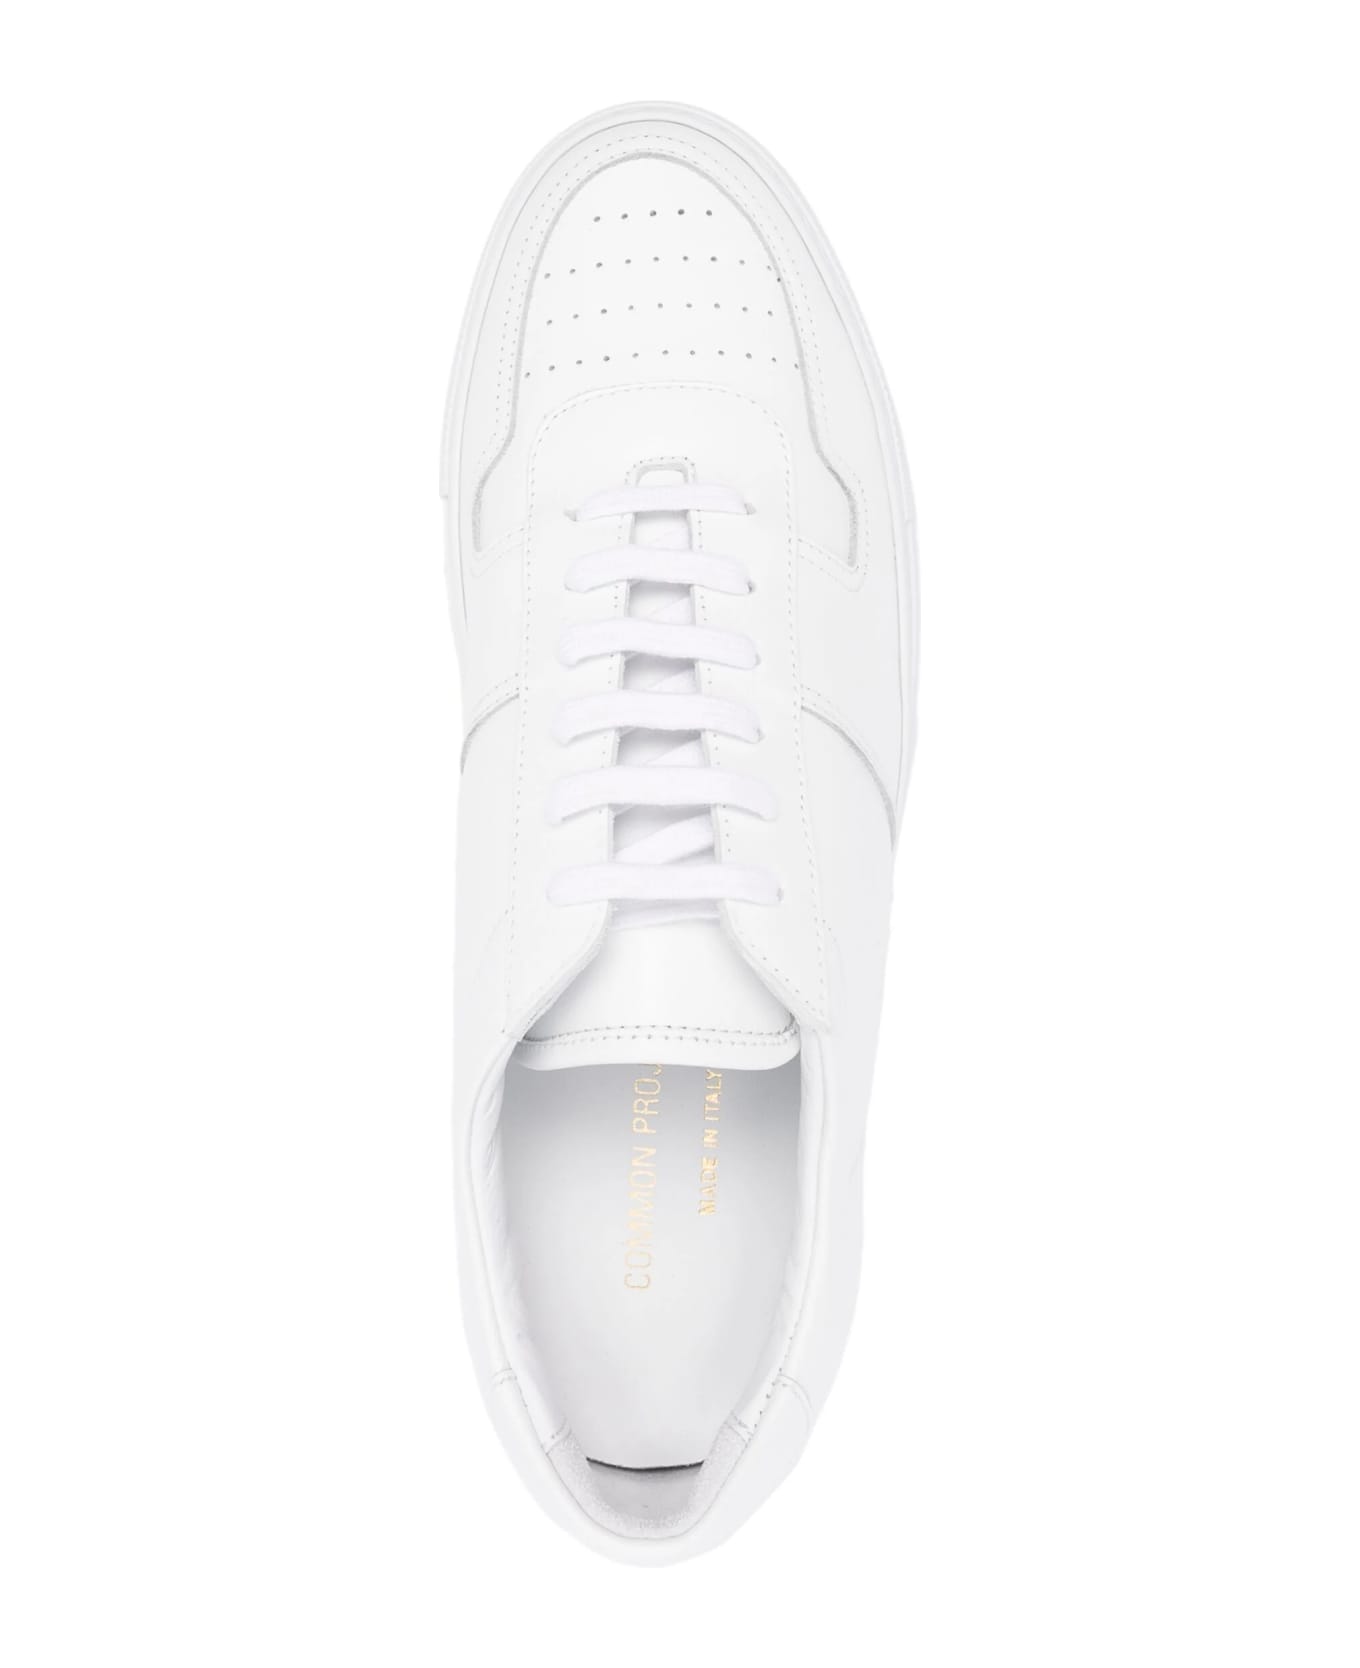 Common Projects Bball Low In Leather - White